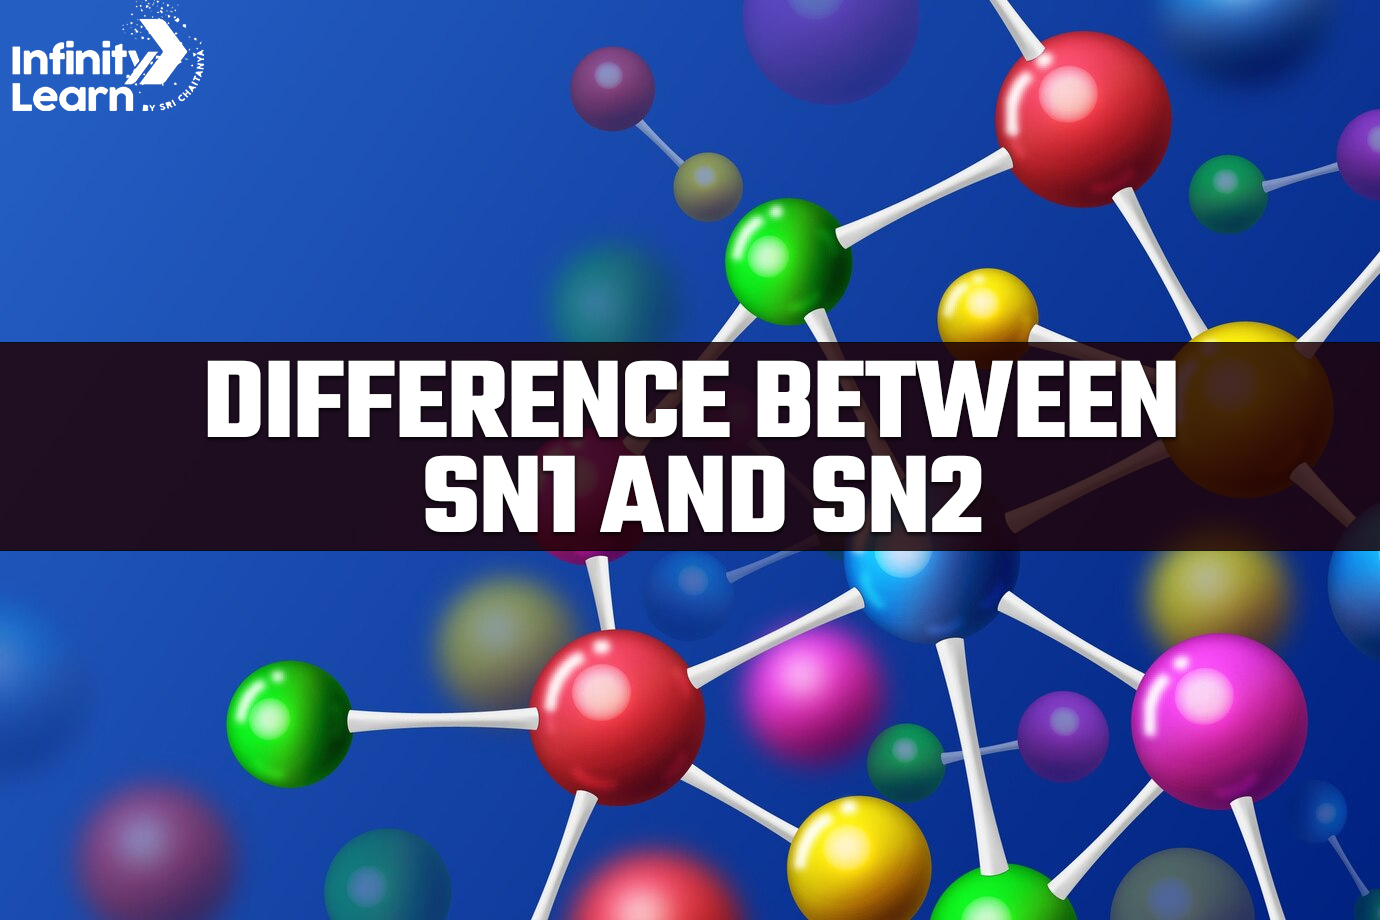 Difference Between SN1 and SN2